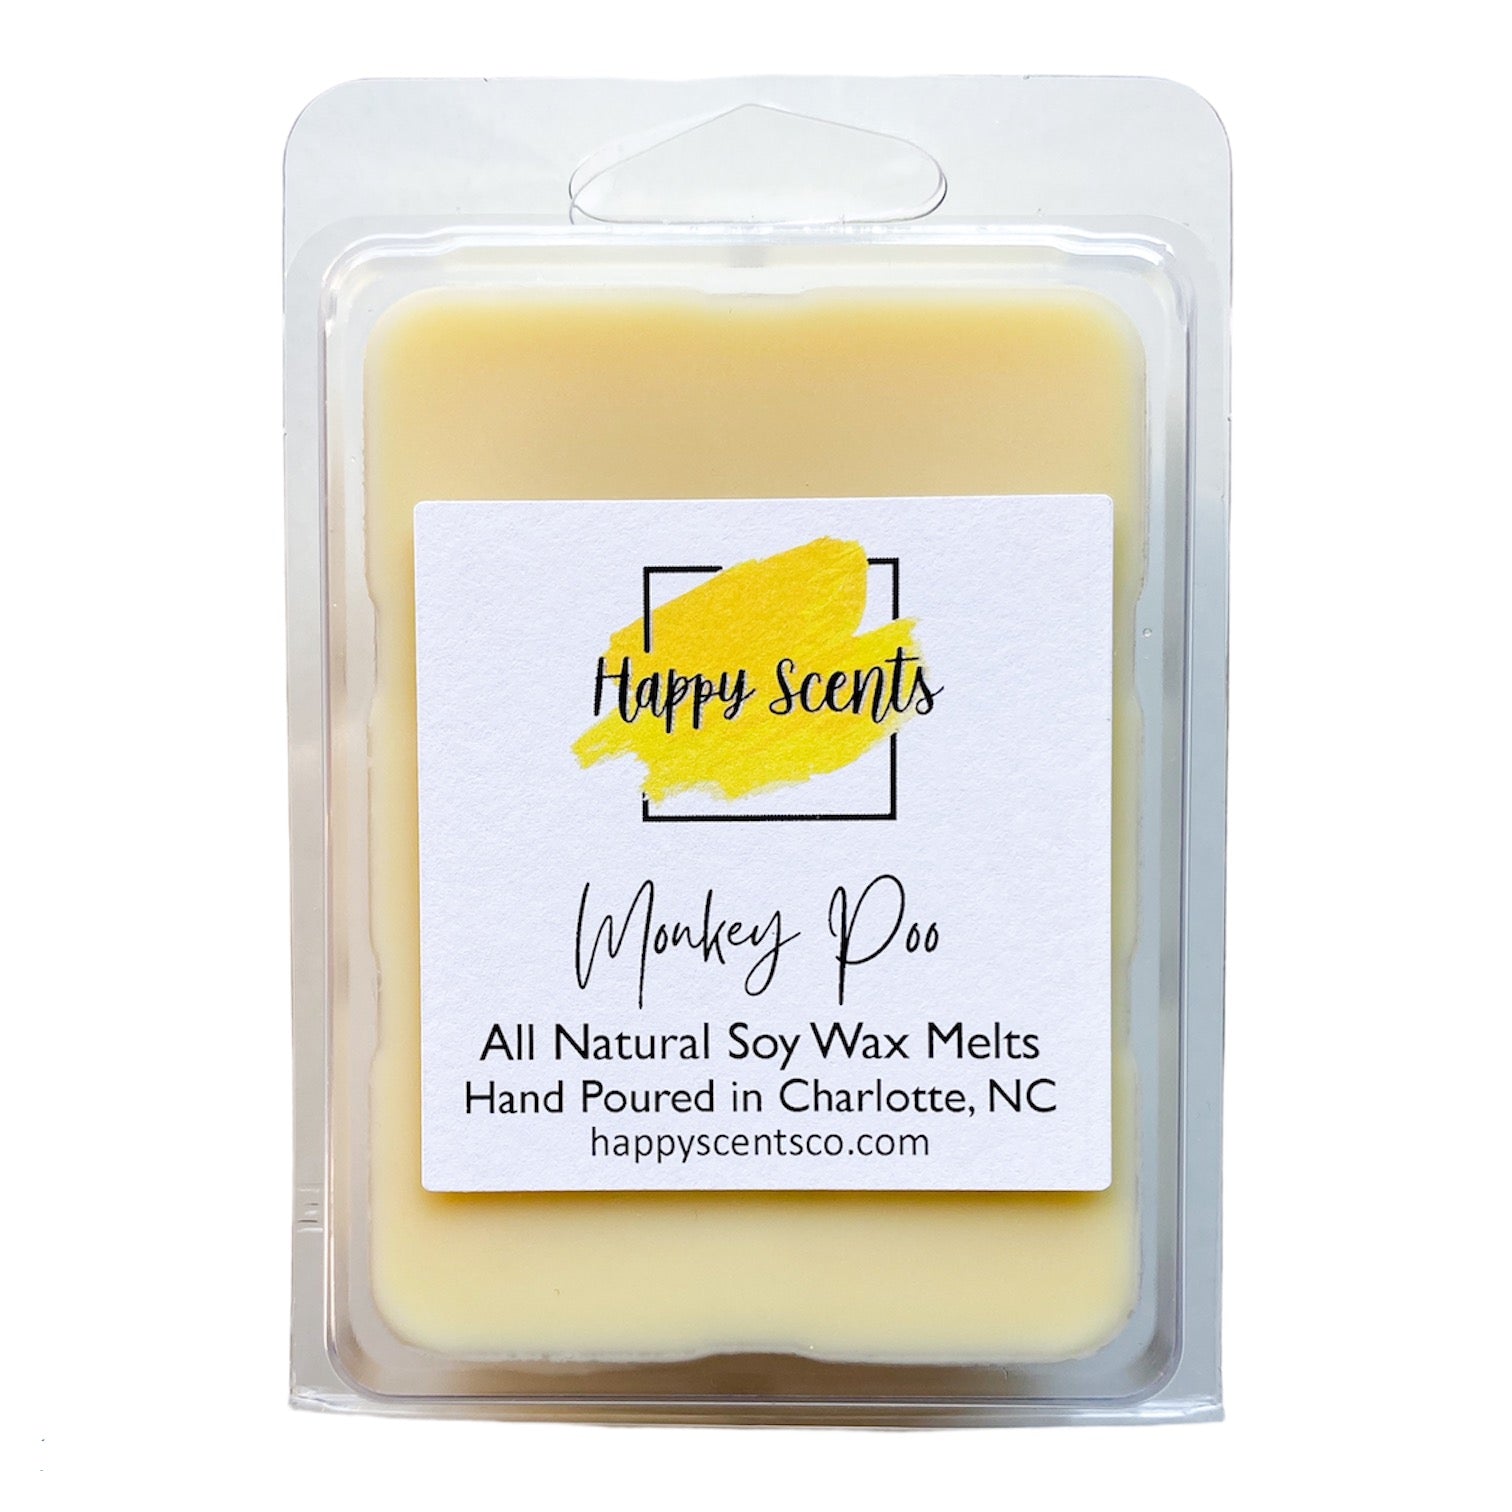 Monkey Poo Wax Melts in Clamshell. Tropical Scented Wax Melts